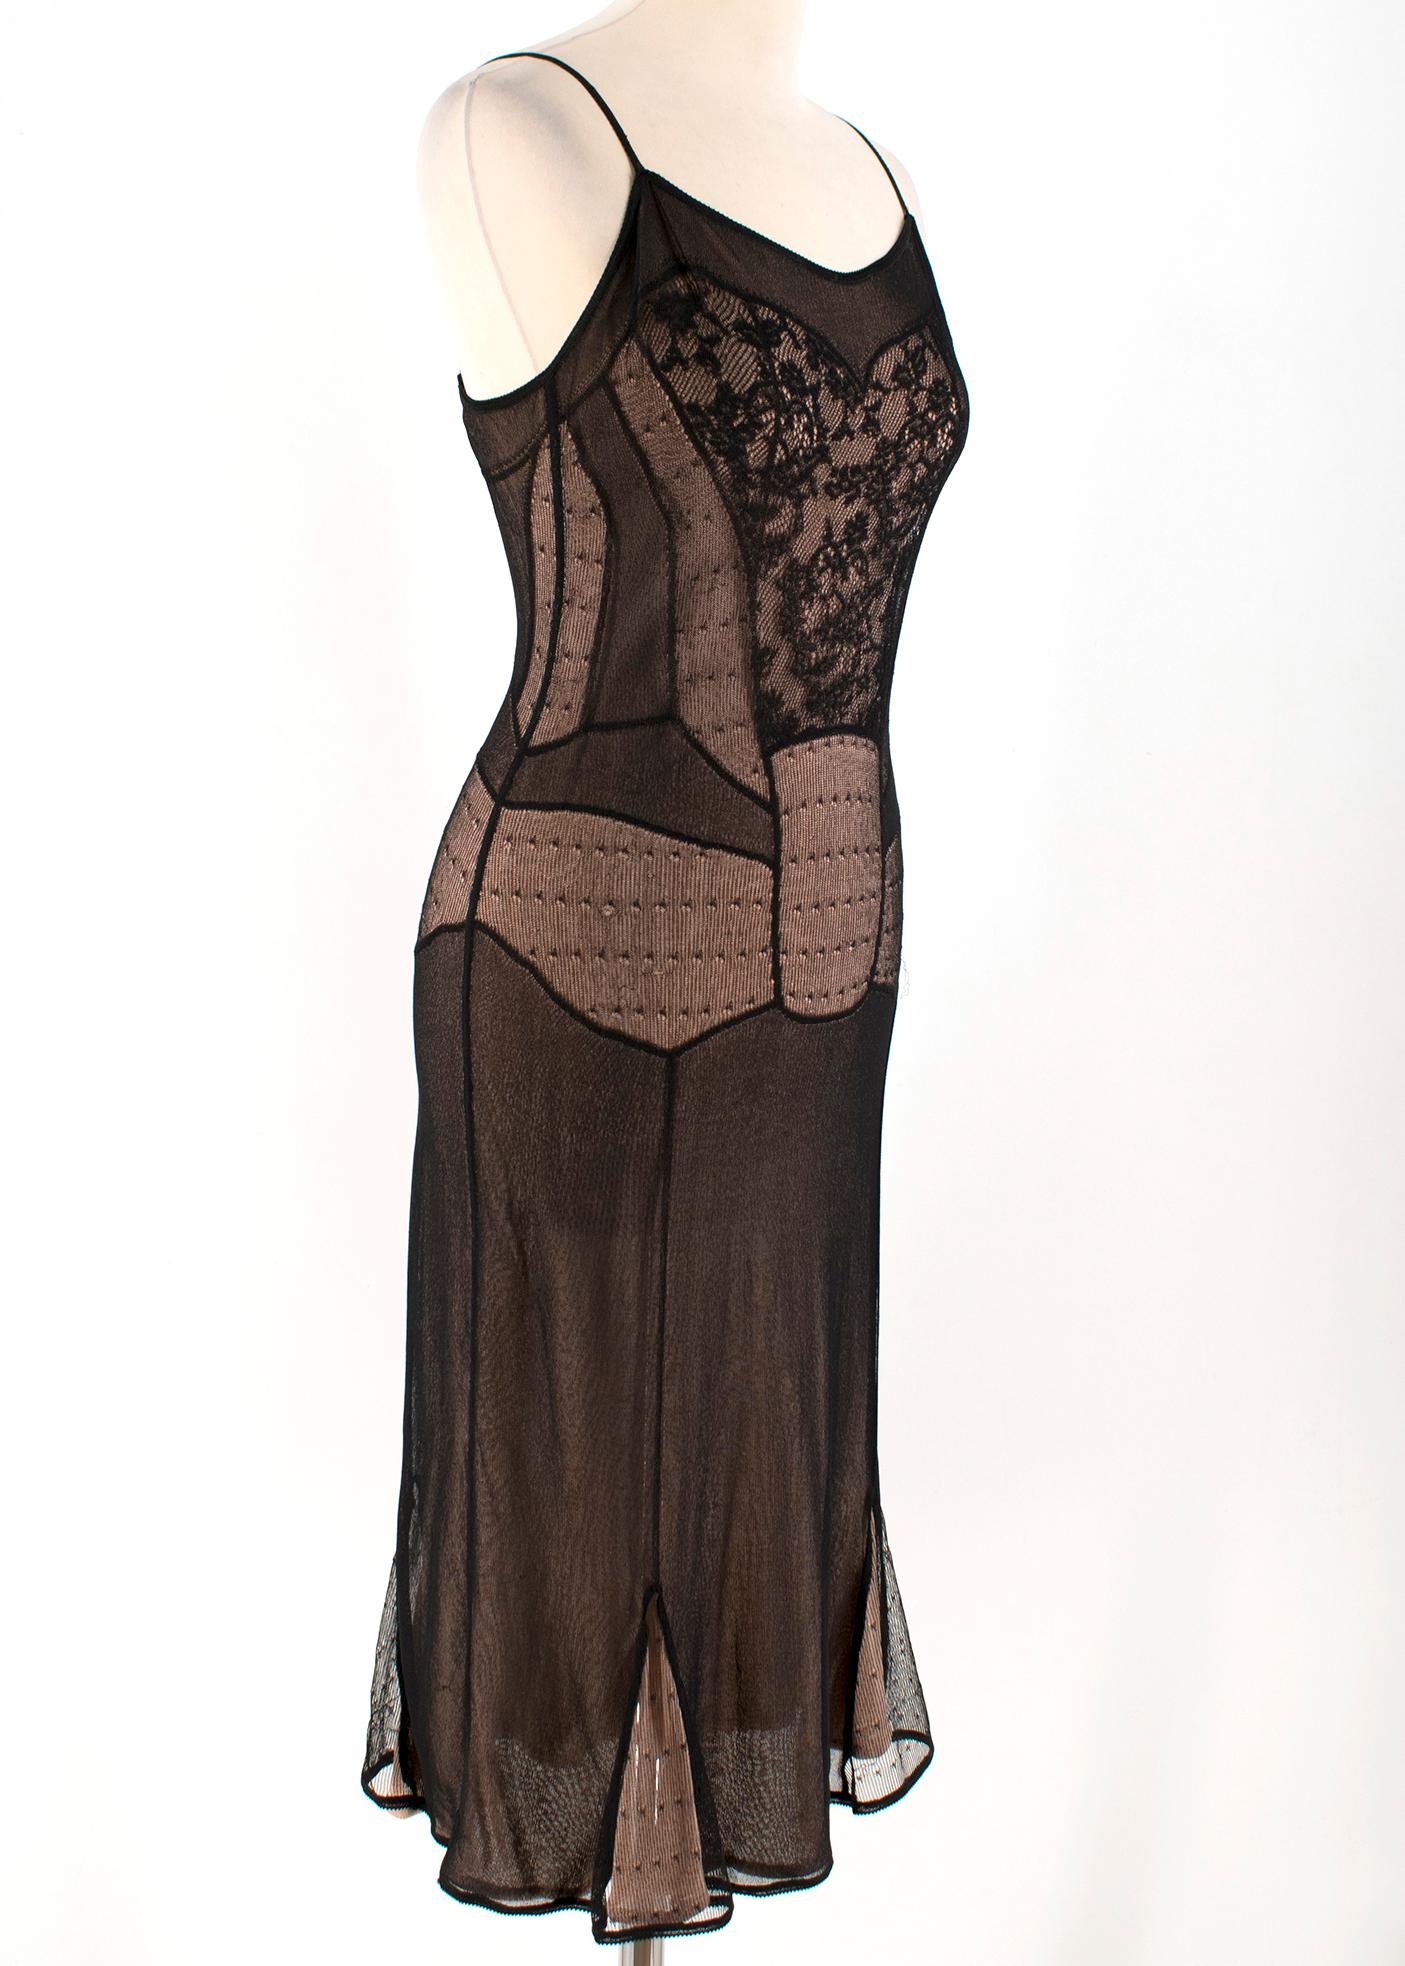 Christian Dior Boutique Black & Nude Laced Dress 

- Black & Nude Dress
- Laced overlay with intricate floral detailing 
- Soft U-neckline 
- Spaghetti straps 
- Nude lining 

Please note, these items are pre-owned and may show some signs of